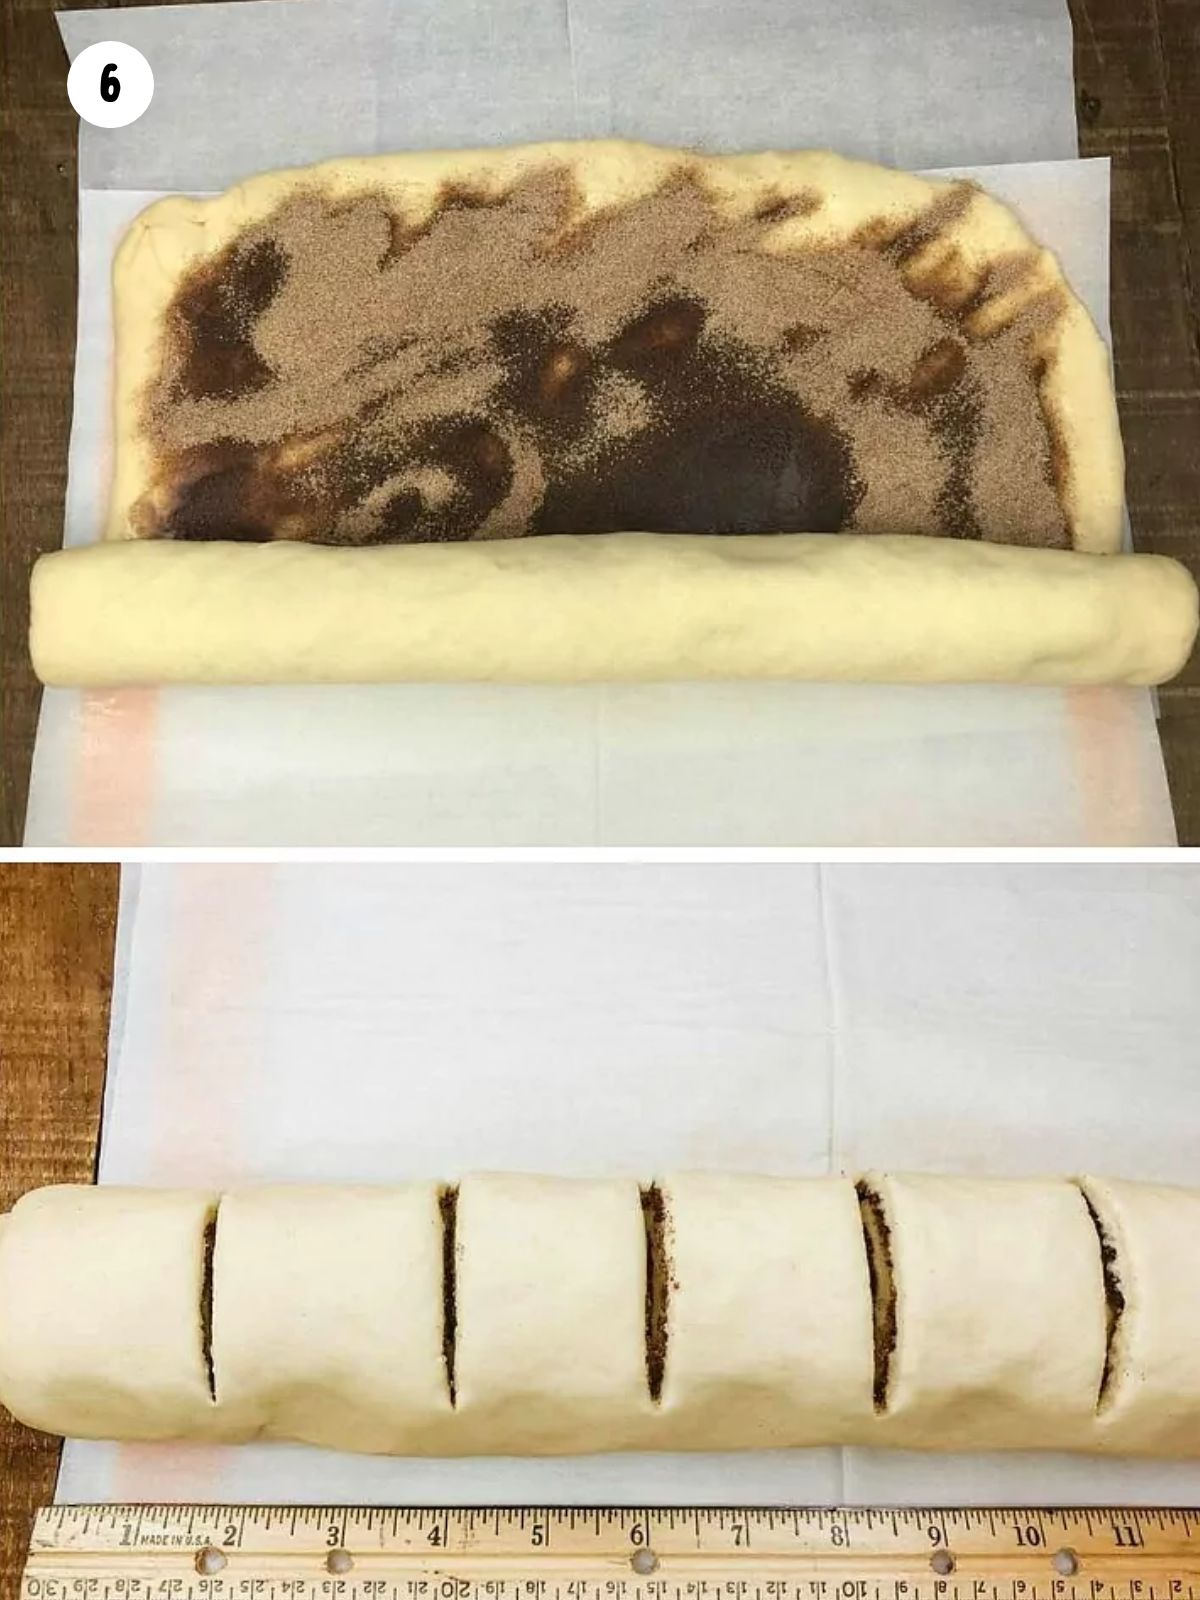 roll up and sliced cinnamon rolls with ruler for measuring.